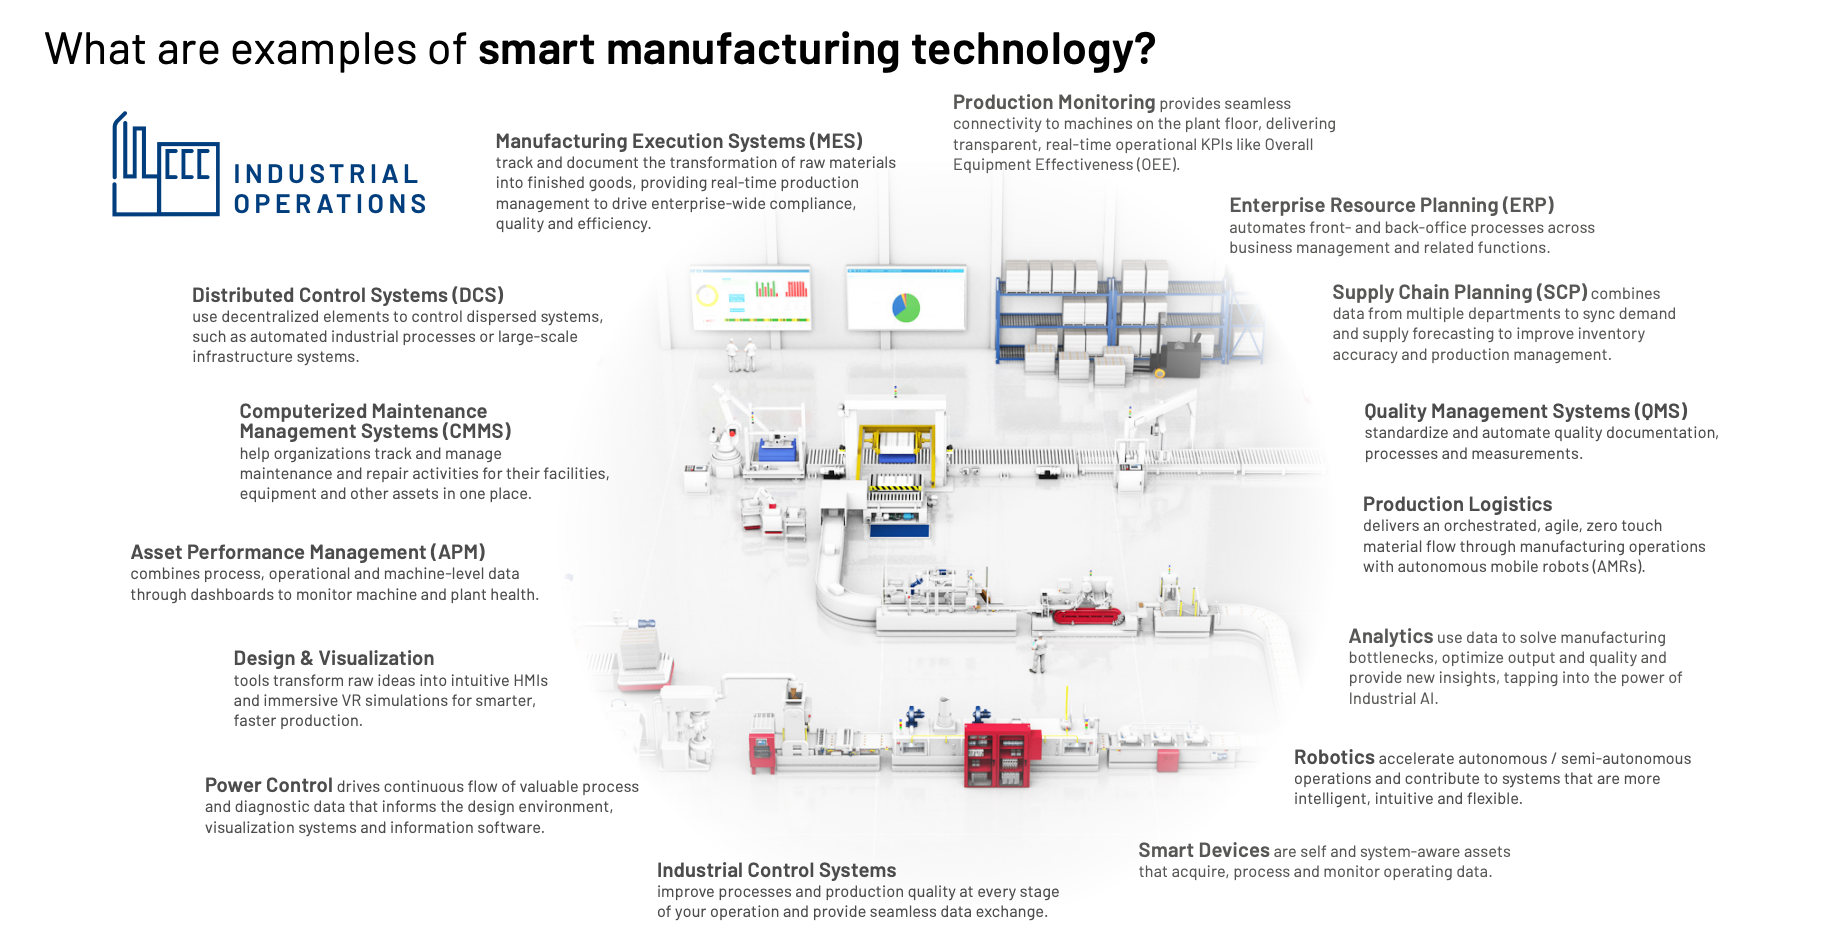 Image 2: Examples of smart manufacturing technology on page 8 of the 9th Annual State of Smart Manufacturing Report.